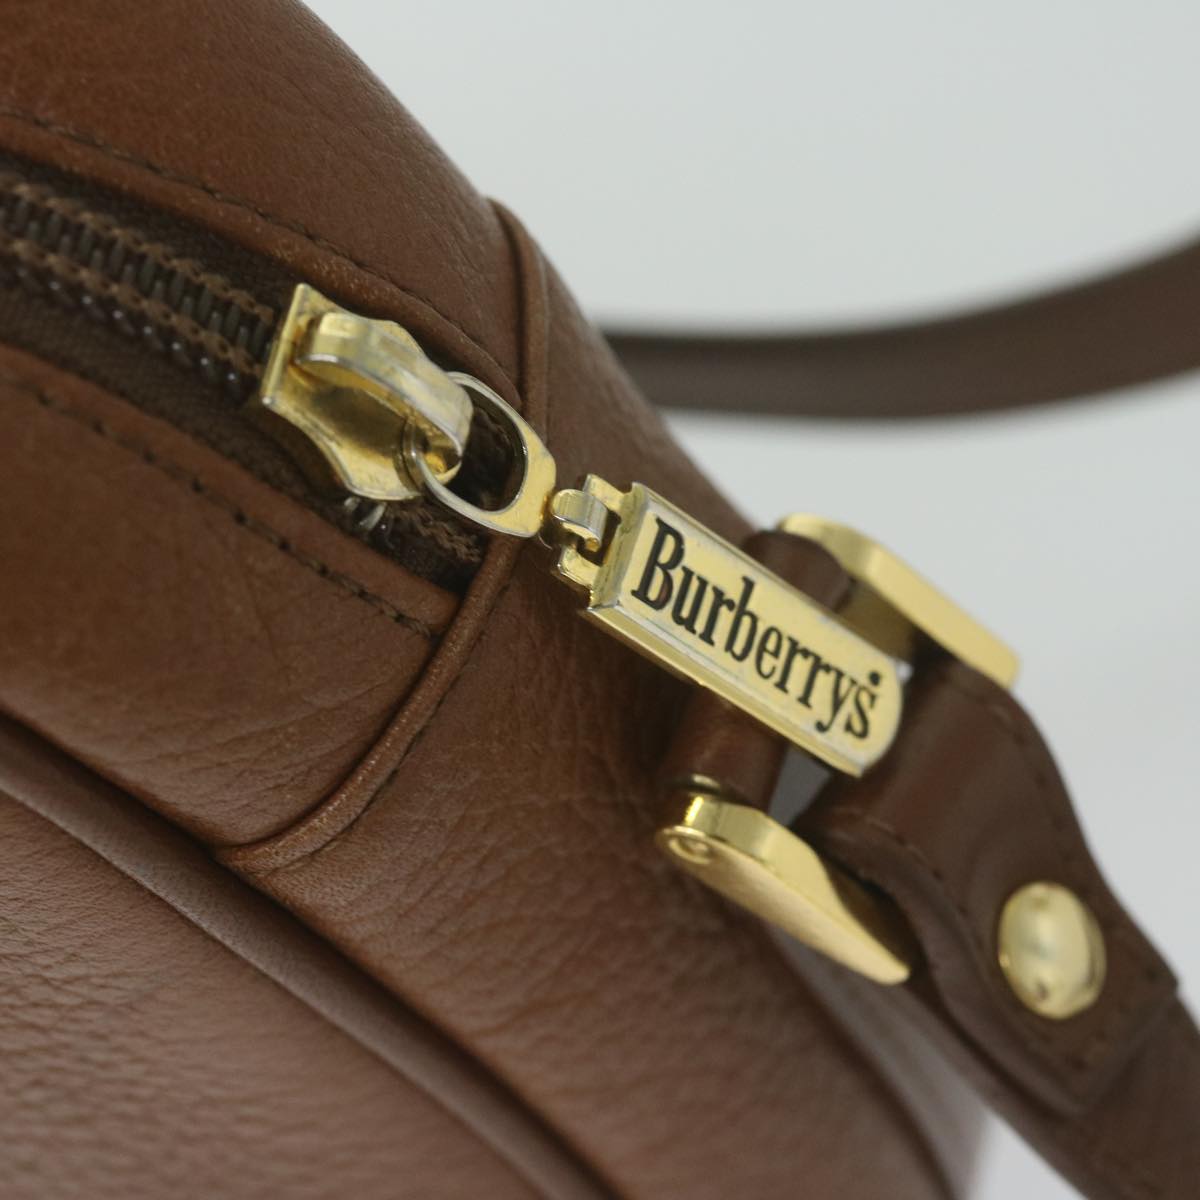 Burberrys Shoulder Bag Leather Brown Auth ep3133